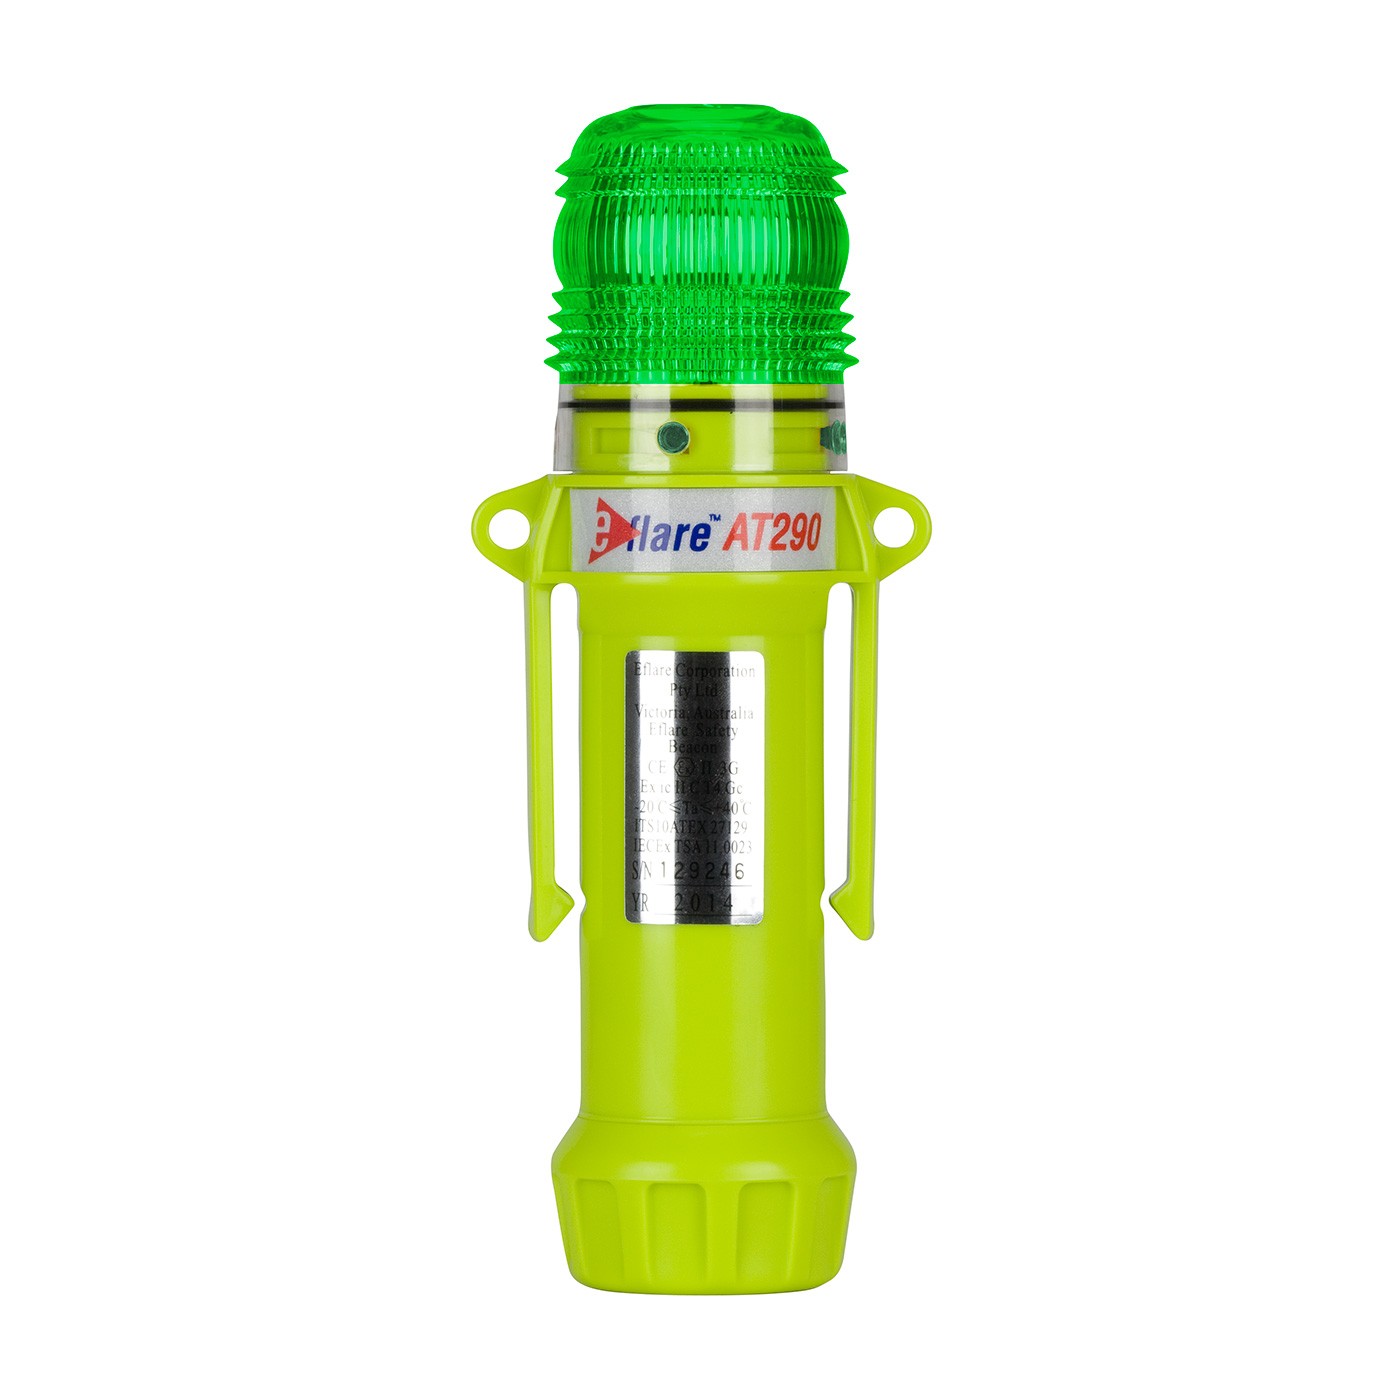 Eflare™ 8" Safety & Emergency Beacon - Flashing / Steady-On Green  (#939-AT290-G)